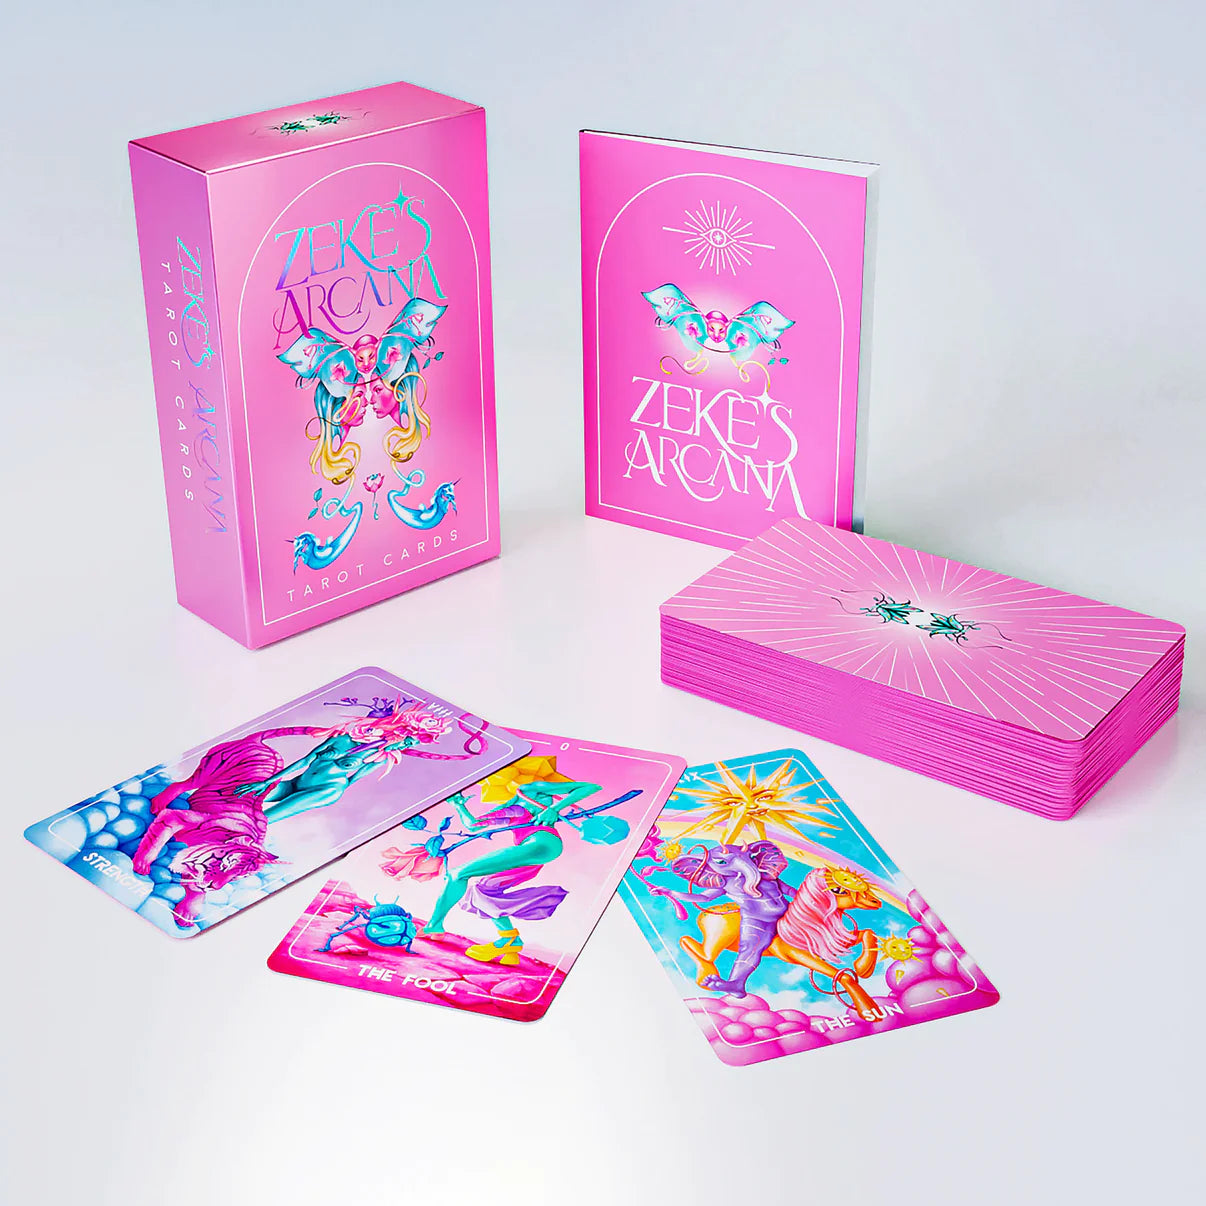 Zeke's Arcana: the cute, pink tarot deck with artistic, quality